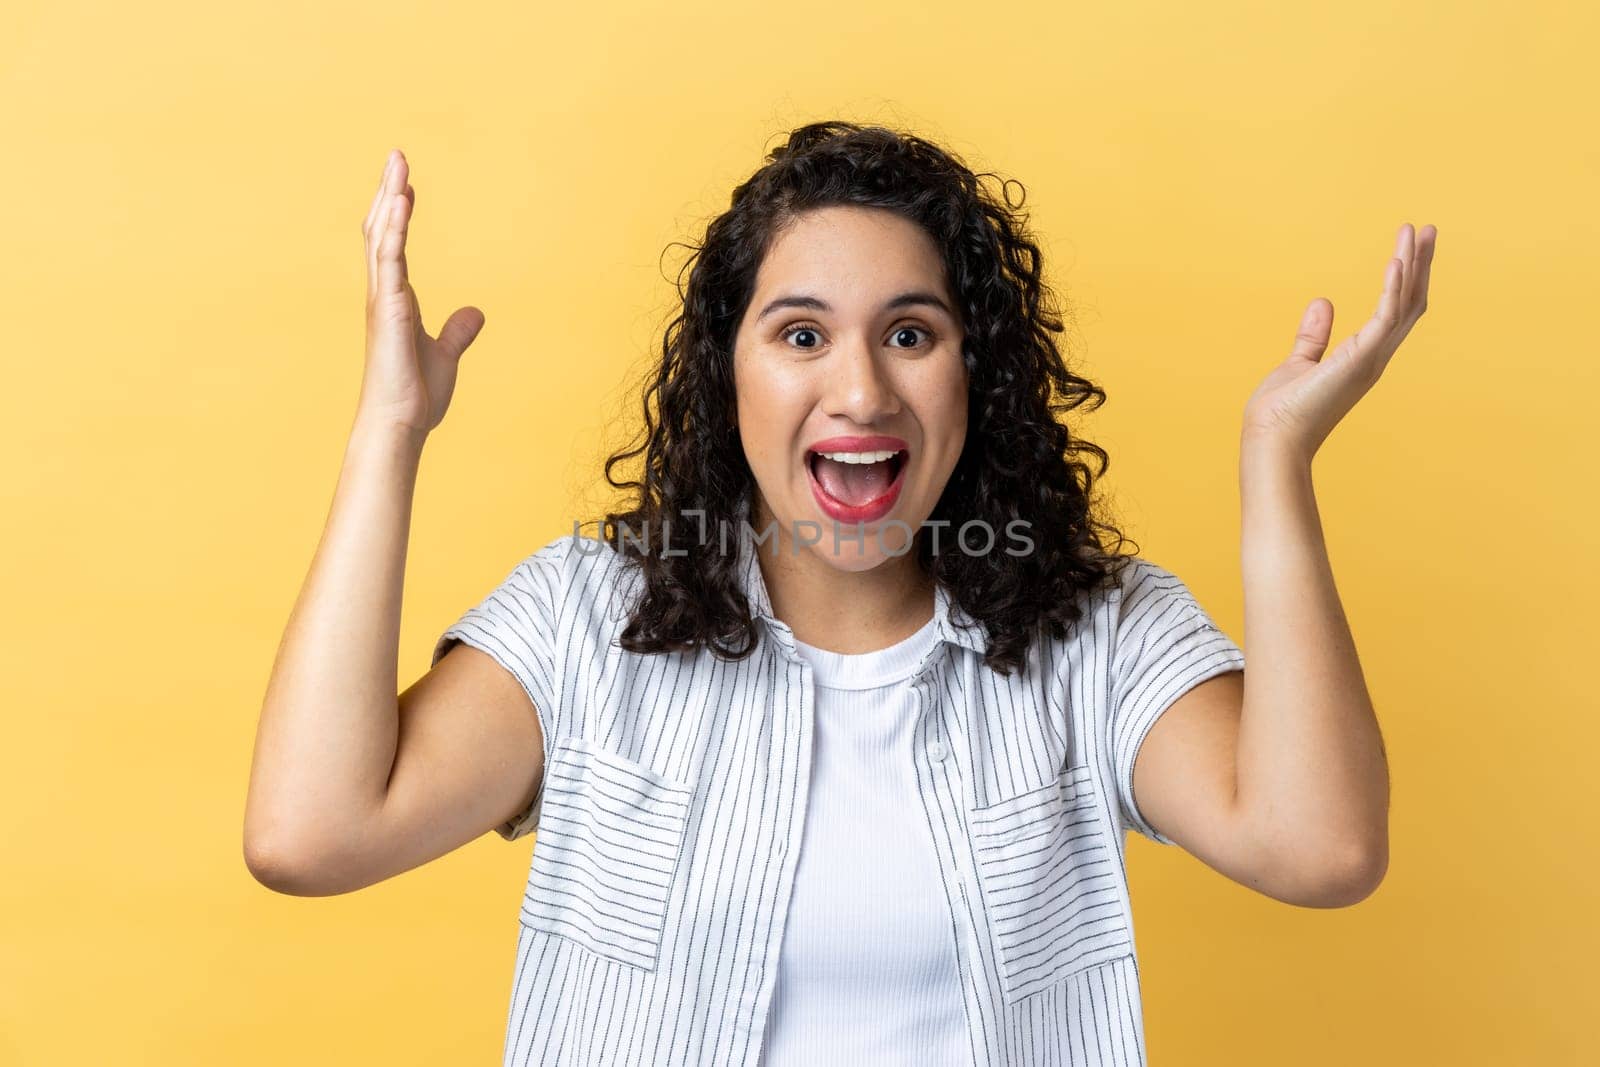 Portrait of amazed excited woman with dark wavy hair looking nat camera with excitement, keeping hands on cheeks, pleasant surprise. Indoor studio shot isolated on yellow background.